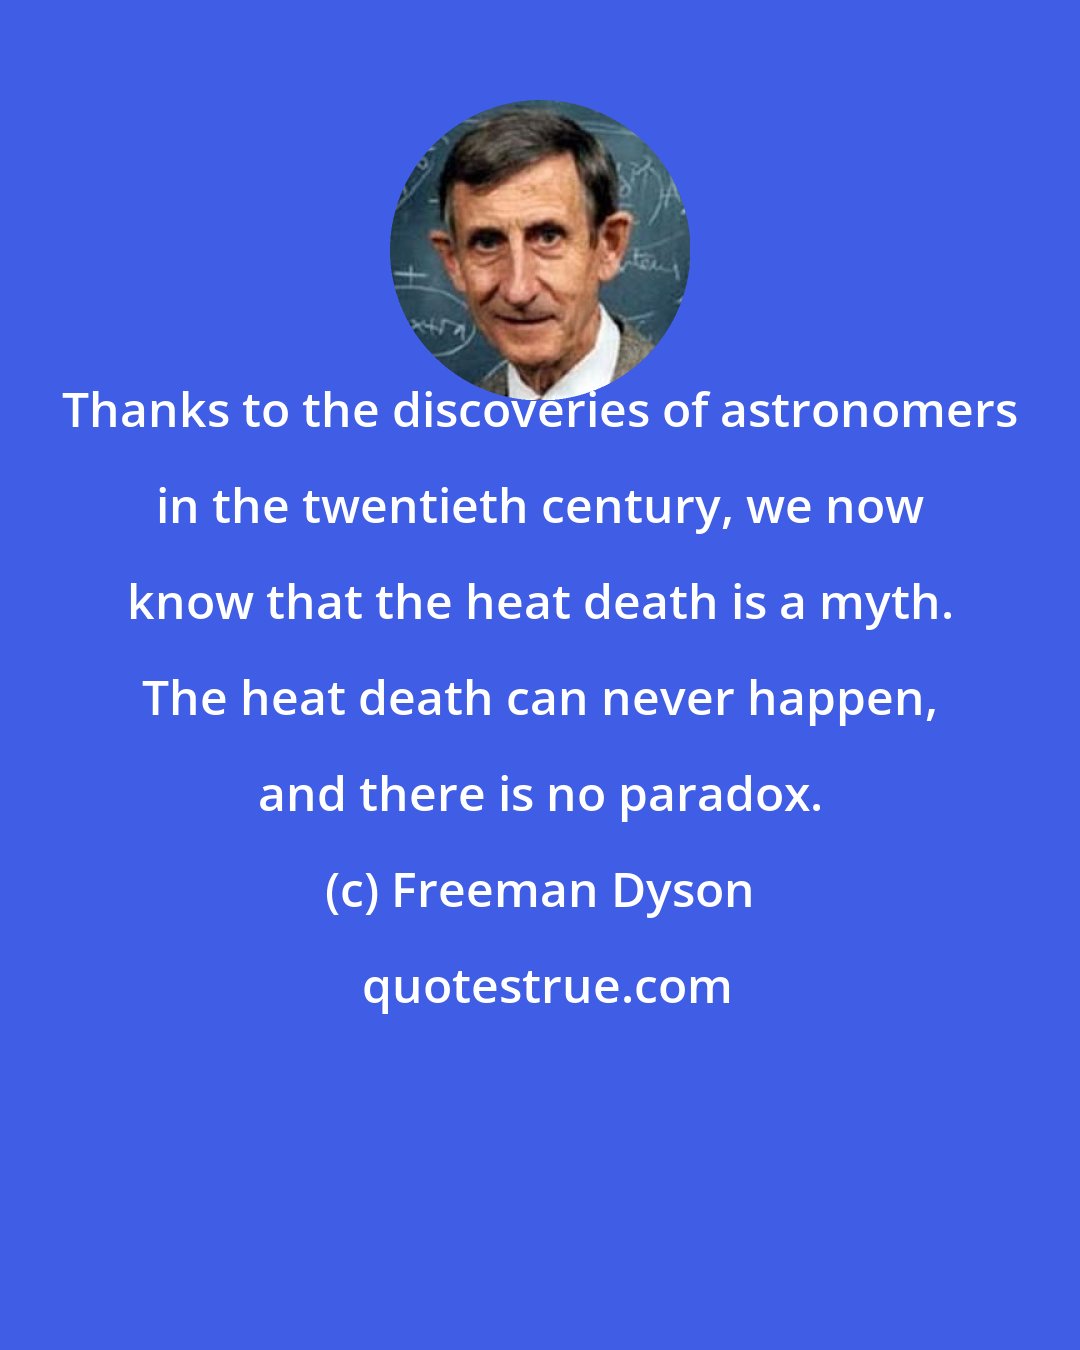 Freeman Dyson: Thanks to the discoveries of astronomers in the twentieth century, we now know that the heat death is a myth. The heat death can never happen, and there is no paradox.